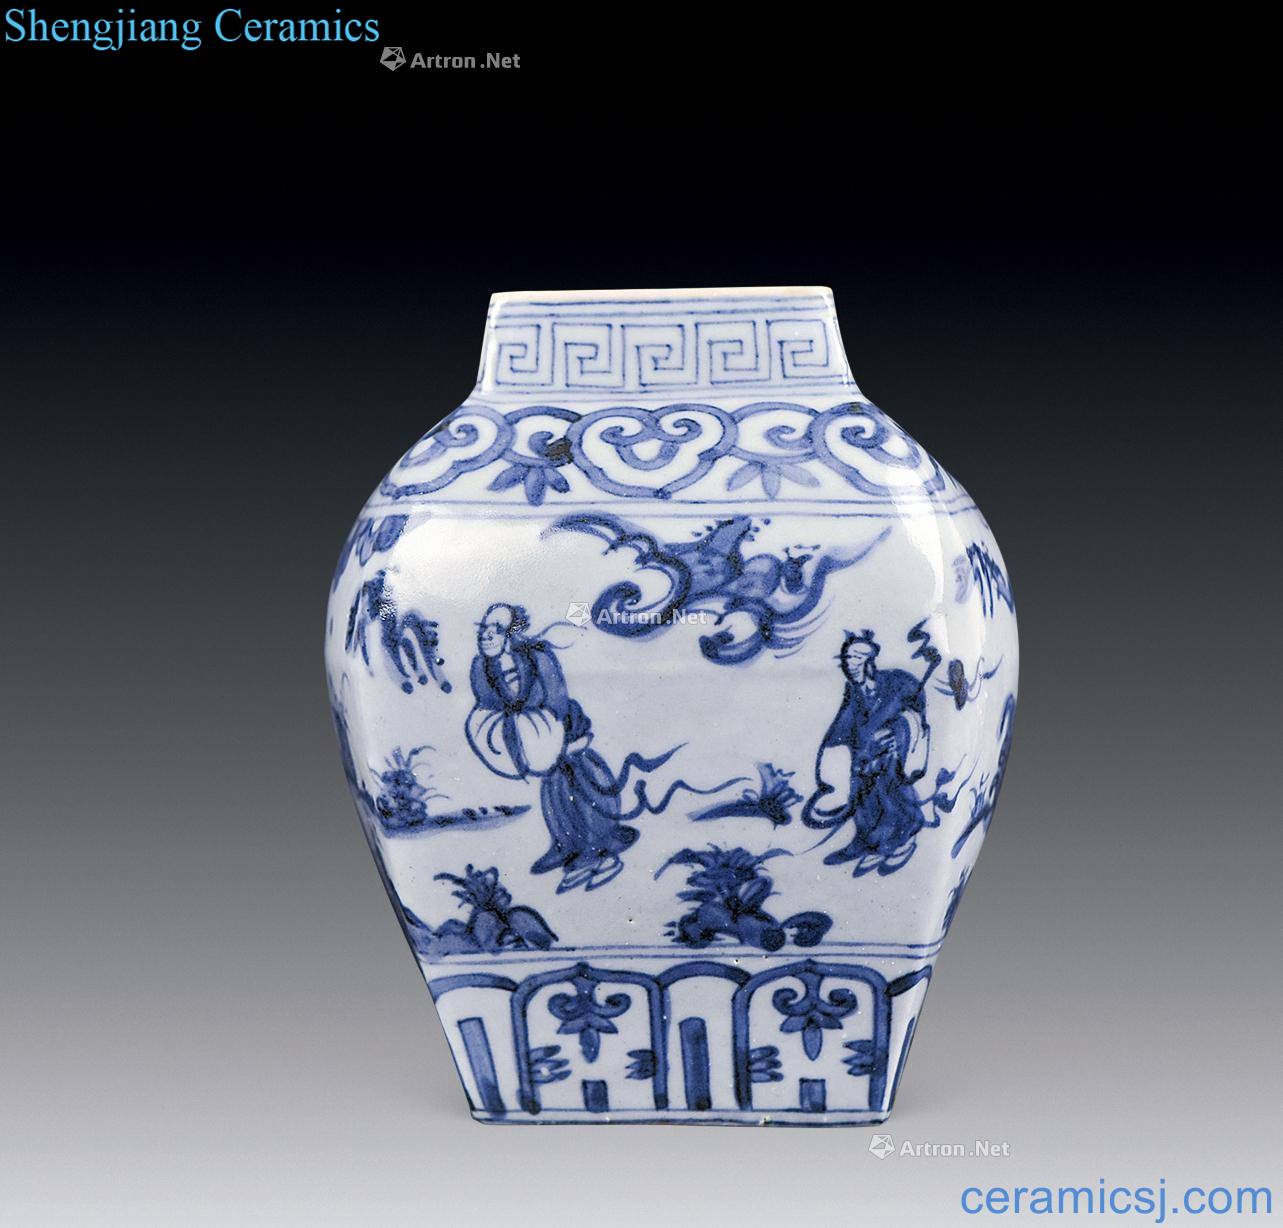 In the qing dynasty Small square bottle of blue and white characters